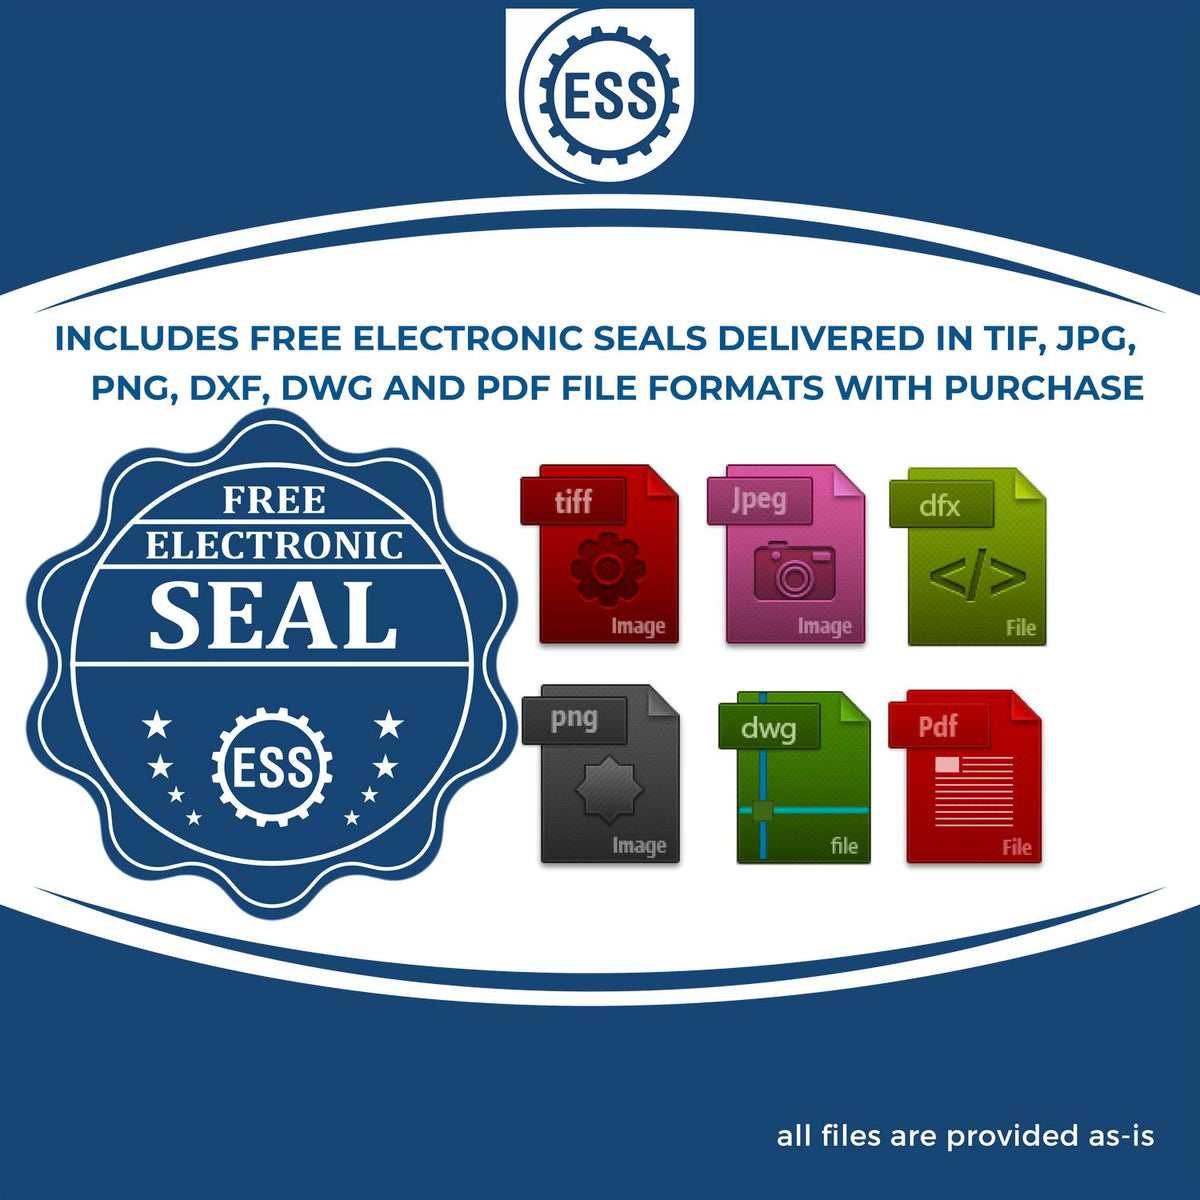 An infographic for the free electronic seal for the PSI West Virginia Notary Stamp illustrating the different file type icons such as DXF, DWG, TIF, JPG and PNG.